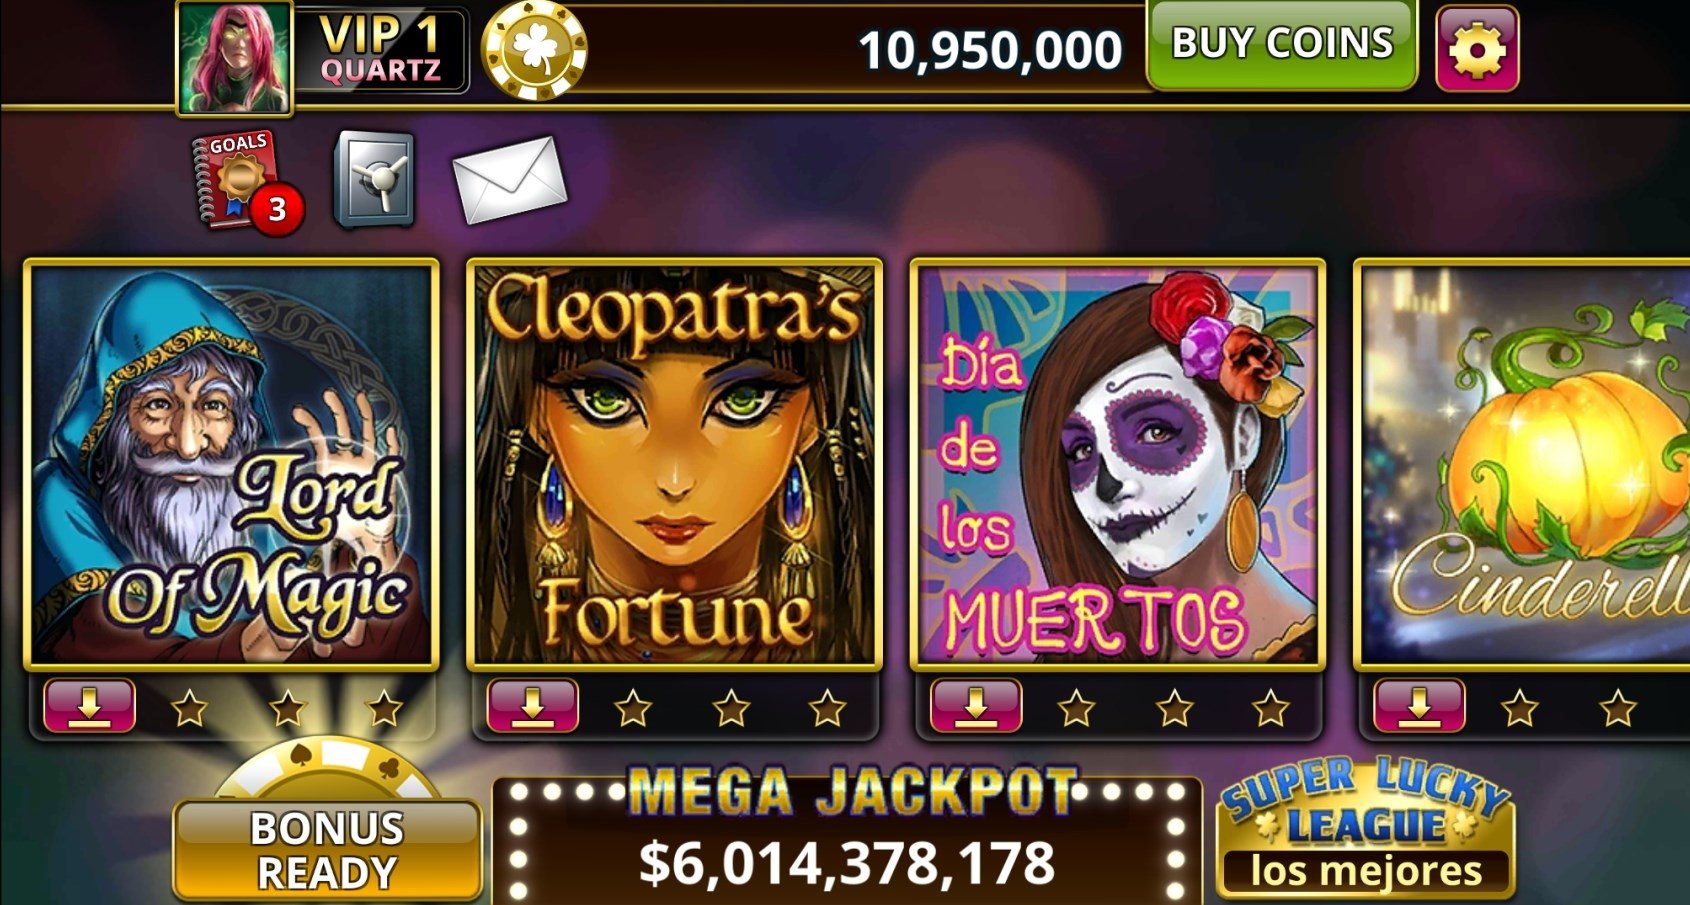 Cash Frenzy Casino 1.74 Download for Android APK Free